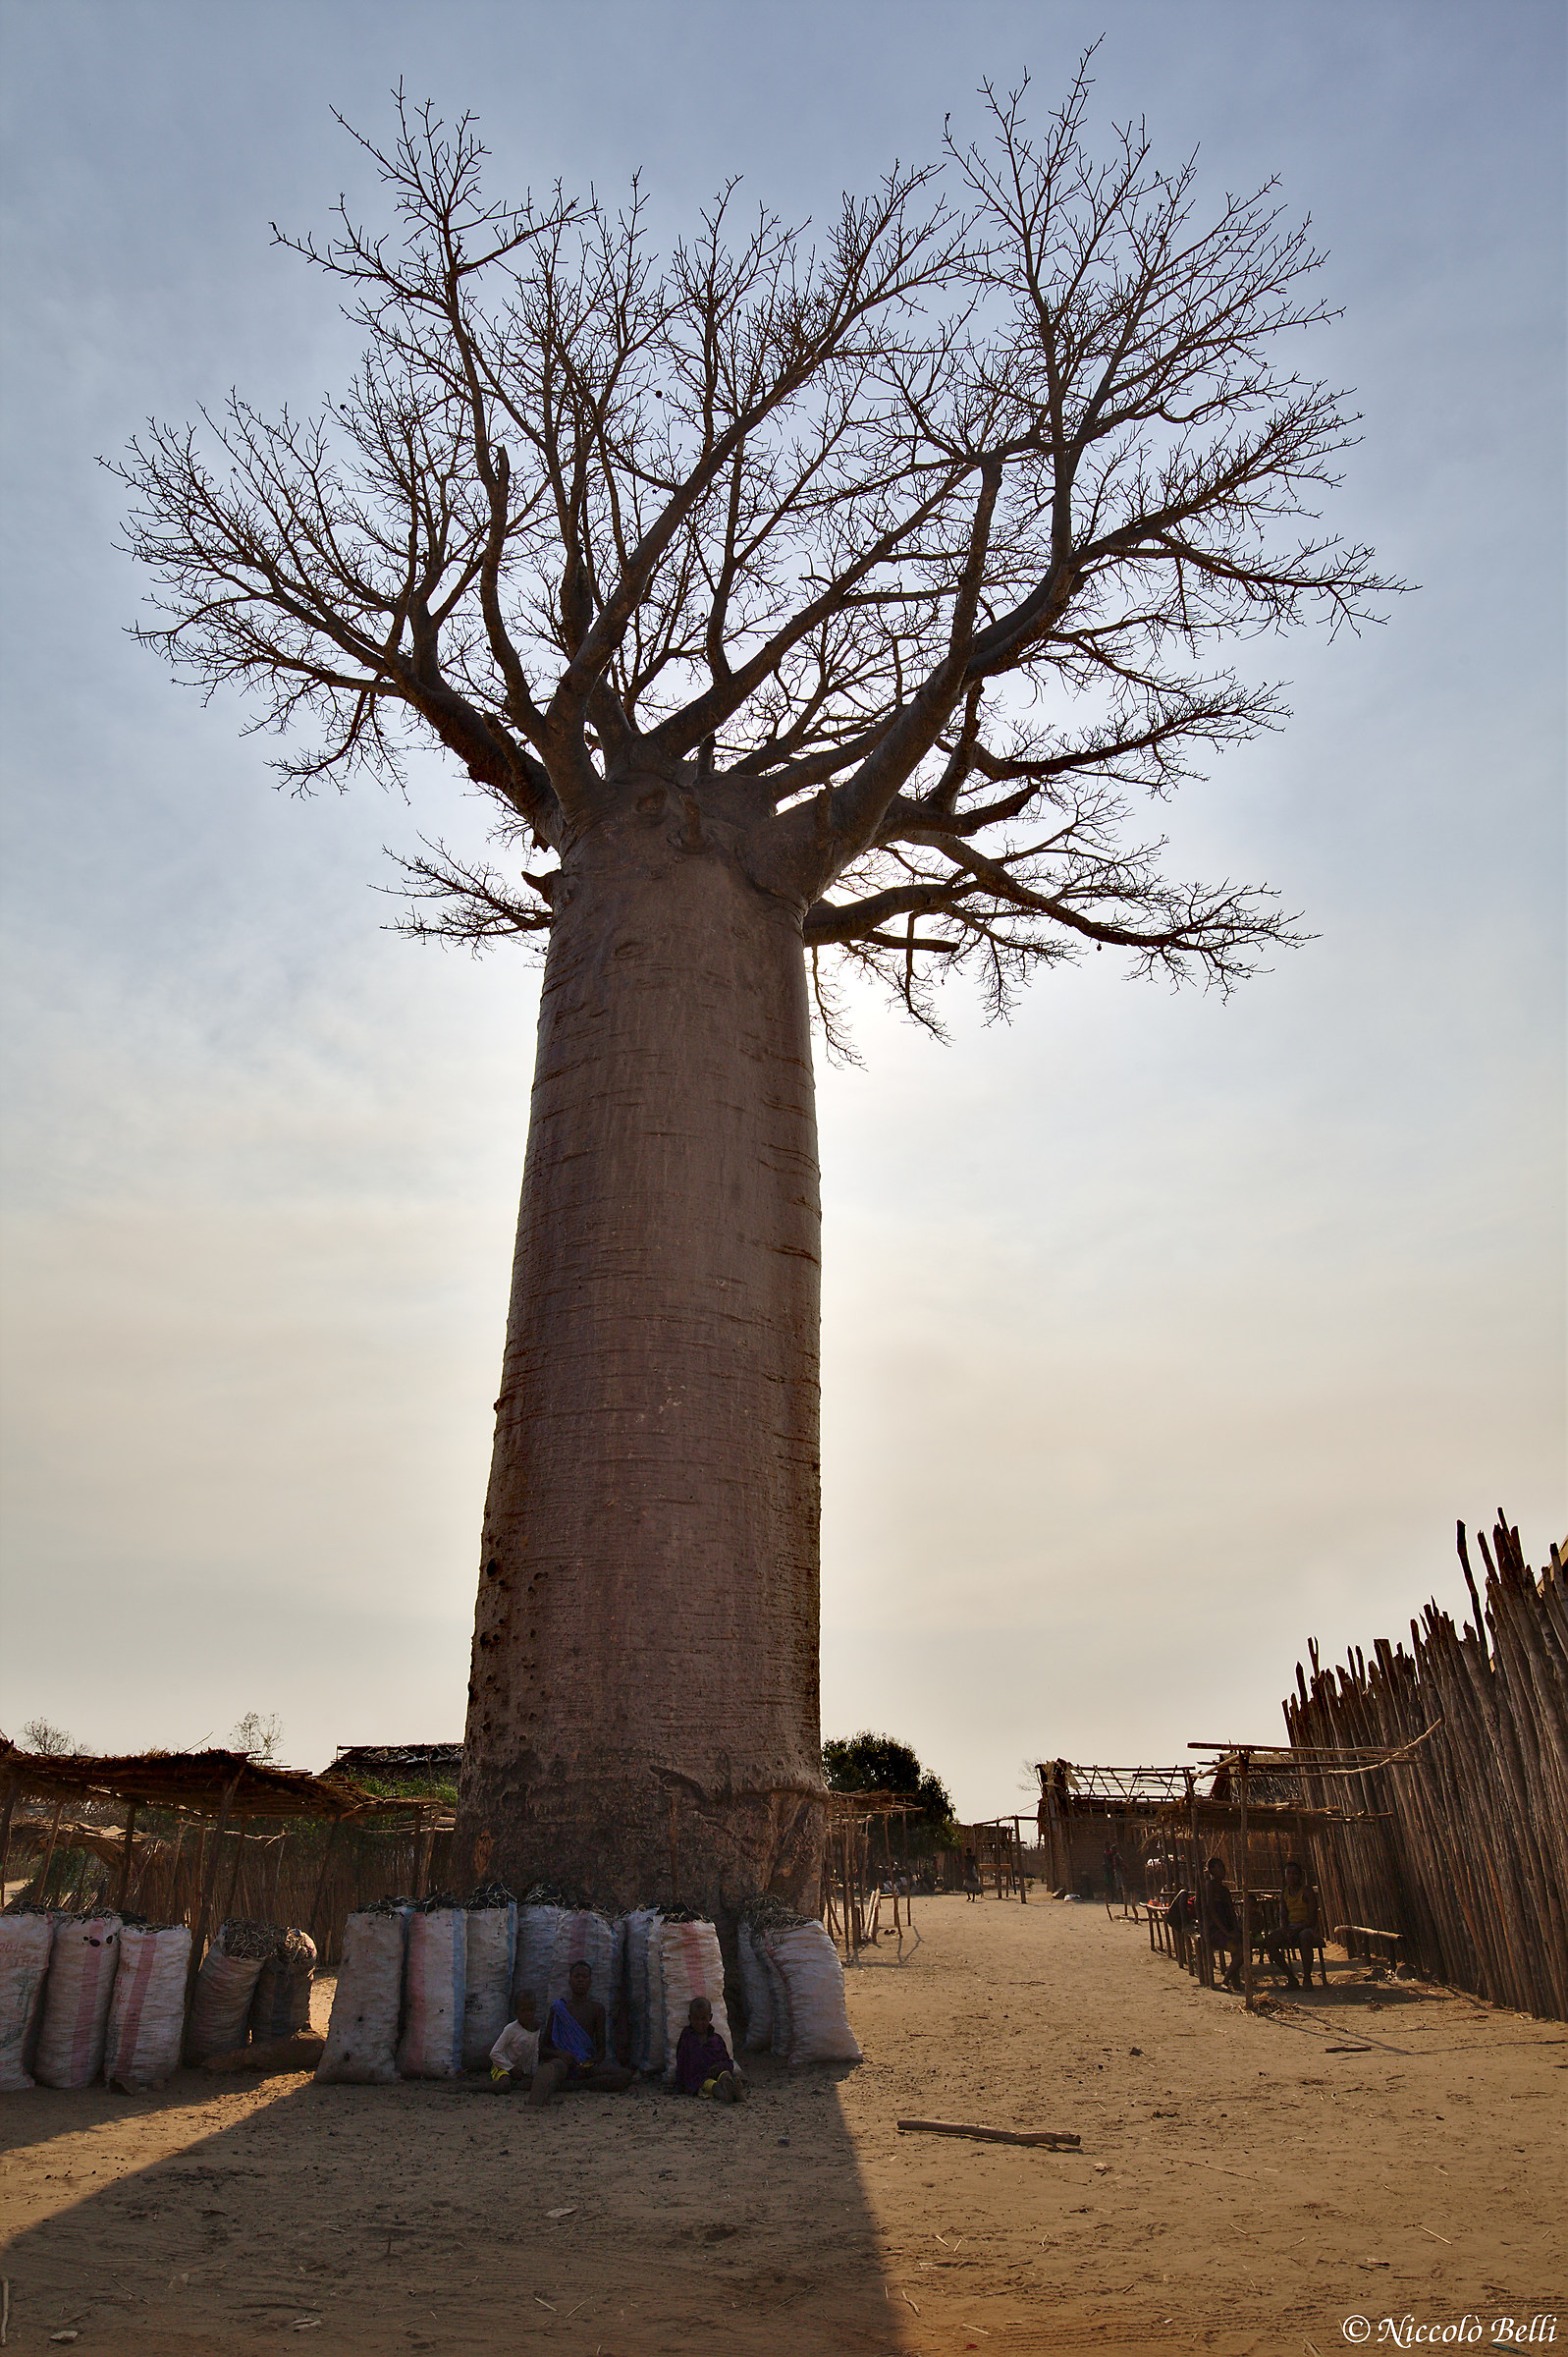 In the shadow of the great Baobab...